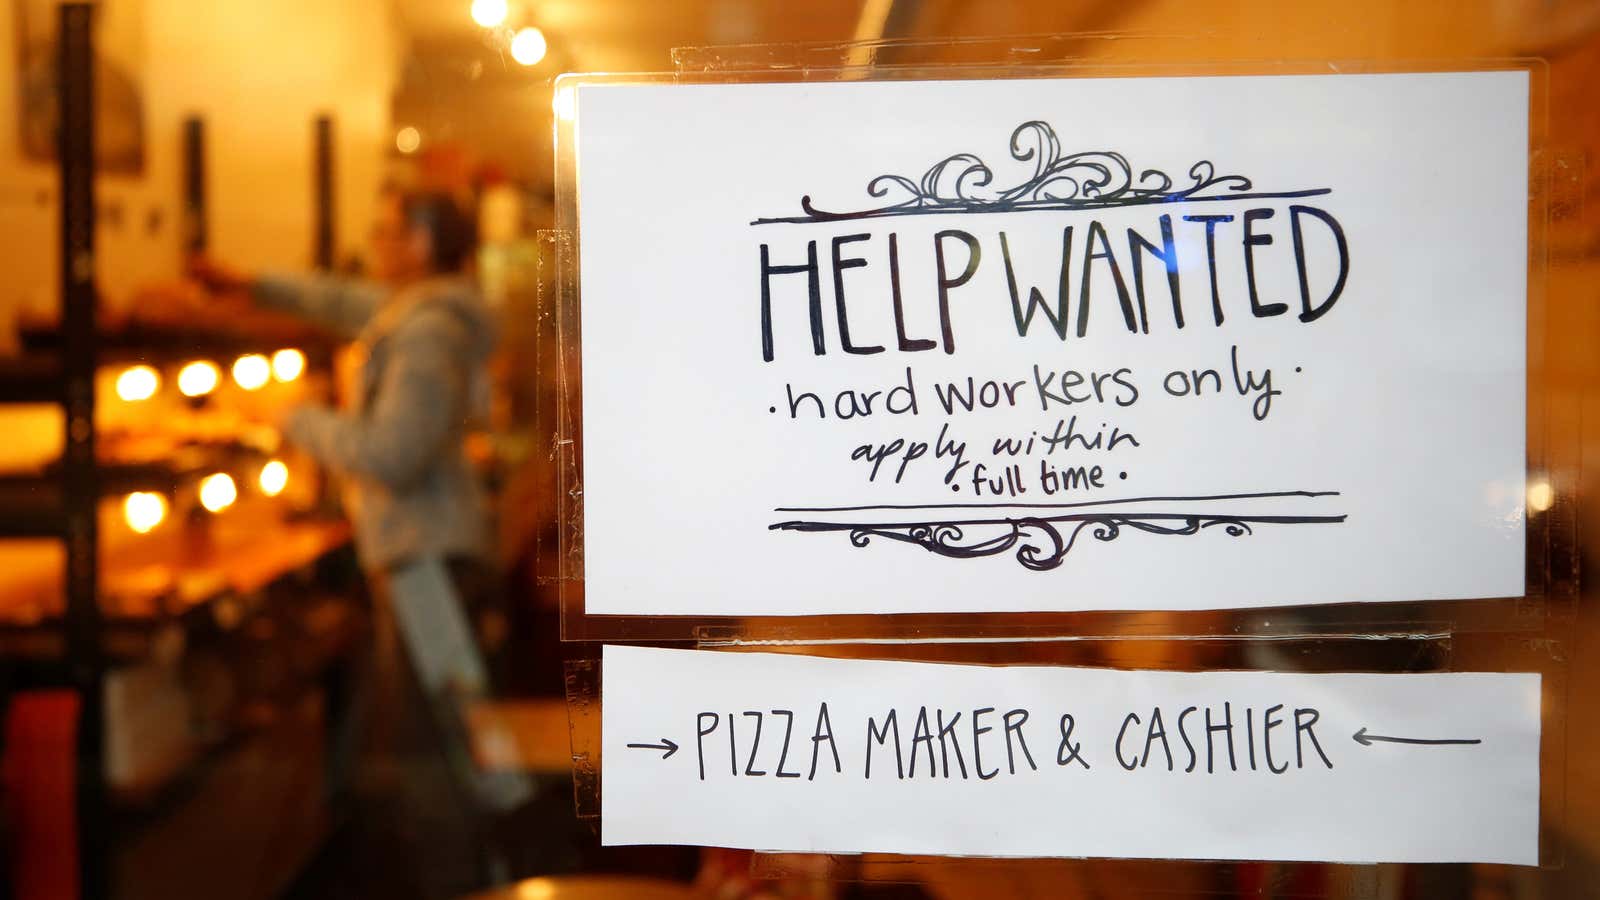 Help wanted, by employers and workers alike.